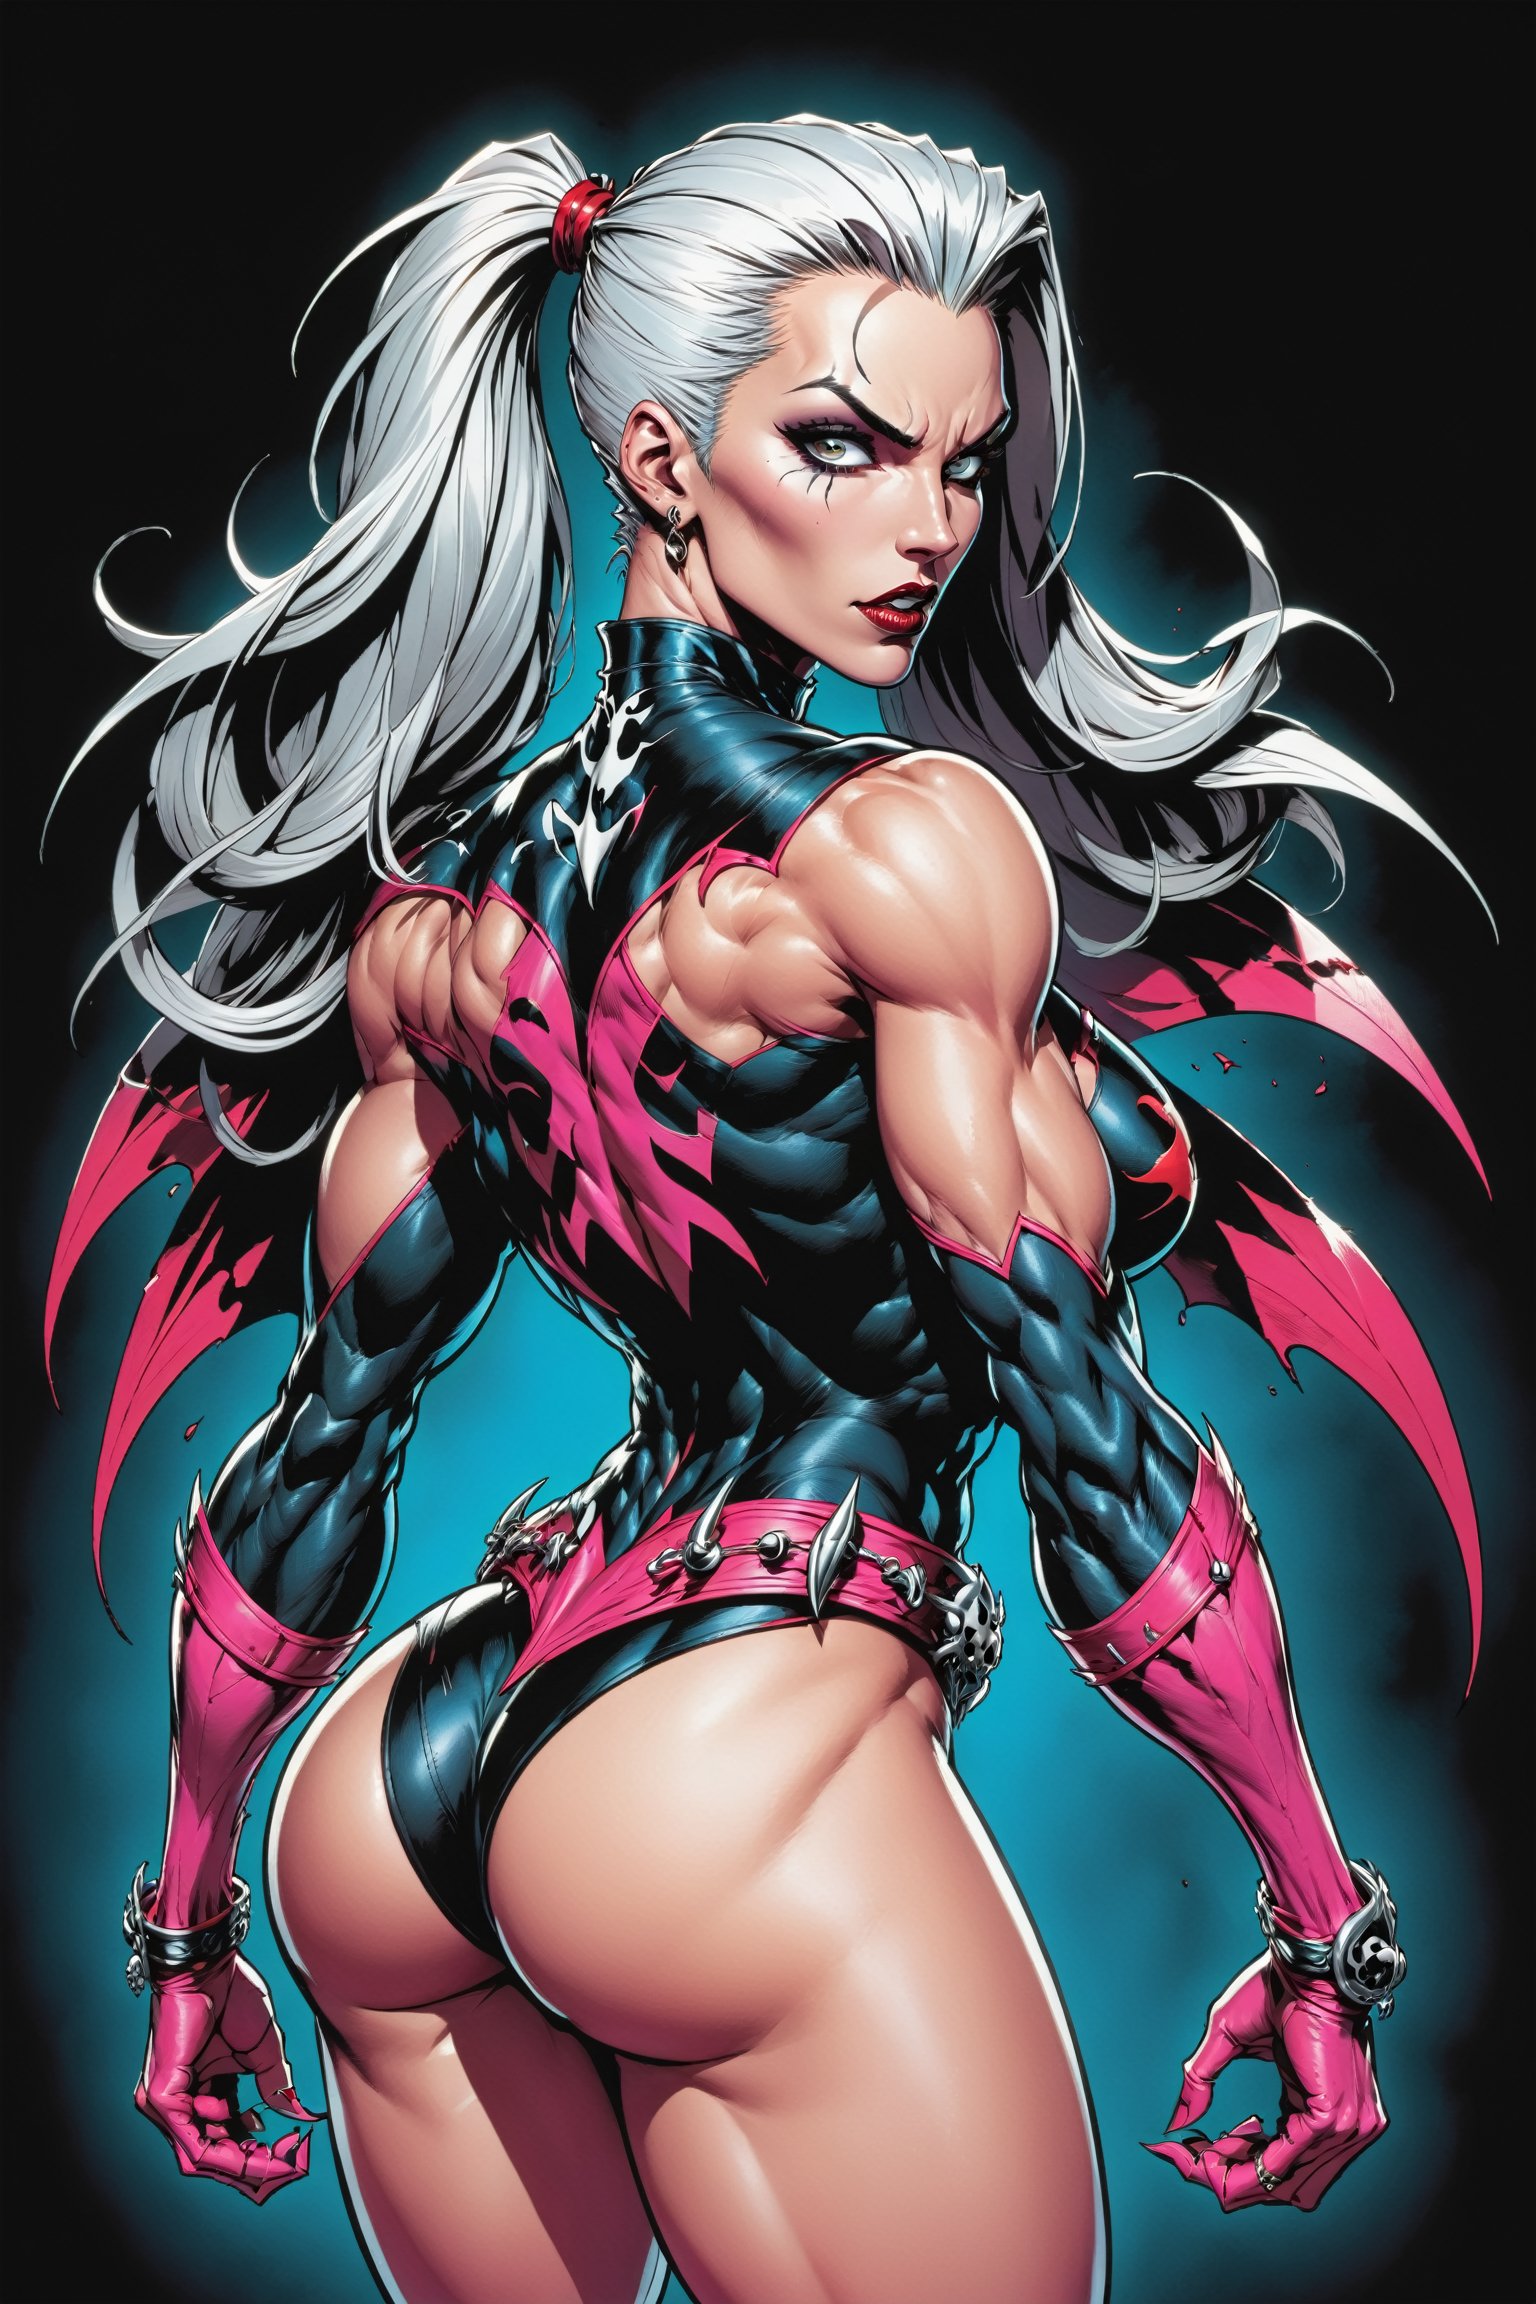 midshot, cel-shading style, centered image, ultra detailed illustration of the comic character ((female Spawn warrior woman, by Todd McFarlane)), posing, extremely muscular overly muscular large breast extremely extremely muscular, black, neon pink, suit with short shorts, with a belt with a skull on it, long white hair in a tall, single ponytail, ((view from Behind she’s looking over her shoulder)),  ((Half Body)), ((view from behind)),  perfect hands, (tetradic colors), inkpunk, ink lines, strong outlines, art by MSchiffer, bold traces, unframed, high contrast, cel-shaded, vector, 4k resolution, best quality, (chromatic aberration:1.8)